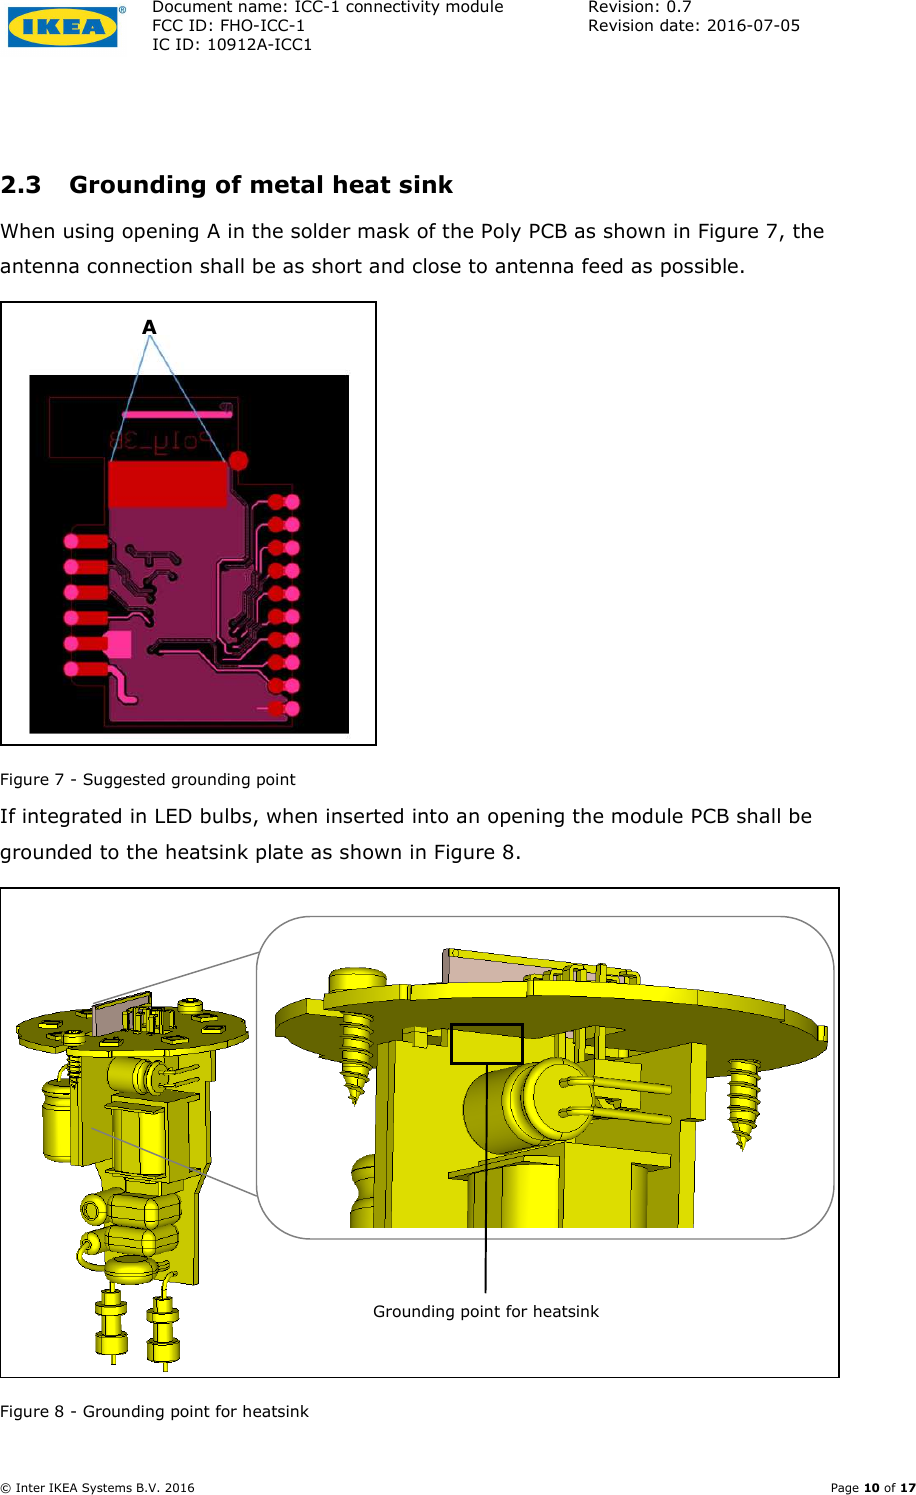 Document name: ICC-1 connectivity module  Revision: 0.7 FCC ID: FHO-ICC-1  Revision date: 2016-07-05  IC ID: 10912A-ICC1     © Inter IKEA Systems B.V. 2016    Page 10 of 17  2.3 Grounding of metal heat sink  When using opening A in the solder mask of the Poly PCB as shown in Figure 7, the antenna connection shall be as short and close to antenna feed as possible.  Figure 7 - Suggested grounding point If integrated in LED bulbs, when inserted into an opening the module PCB shall be grounded to the heatsink plate as shown in Figure 8.  Figure 8 - Grounding point for heatsink Grounding point for heatsink A 